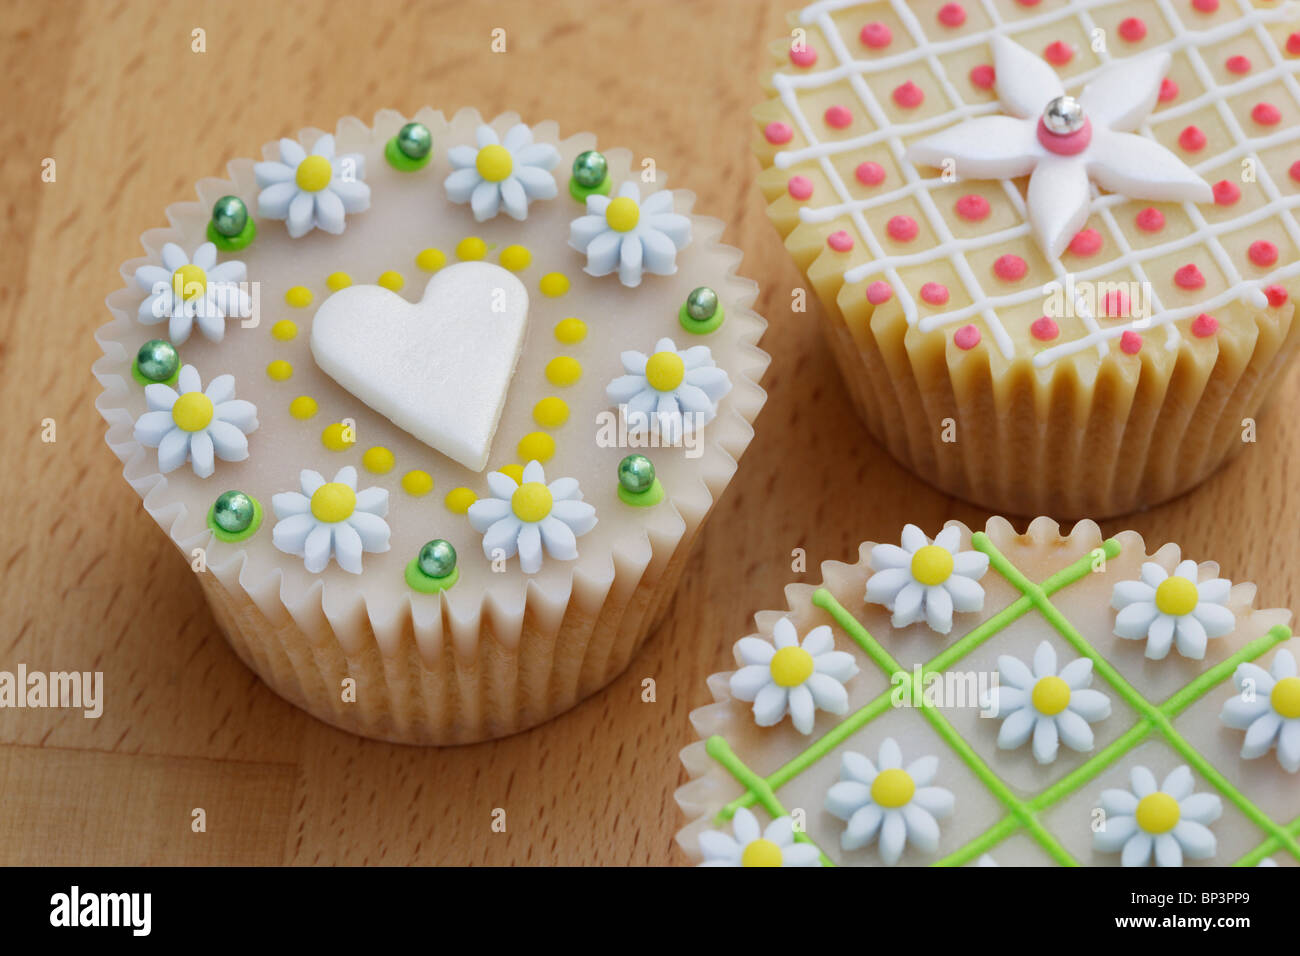 Highly decorated cup cakes Stock Photo